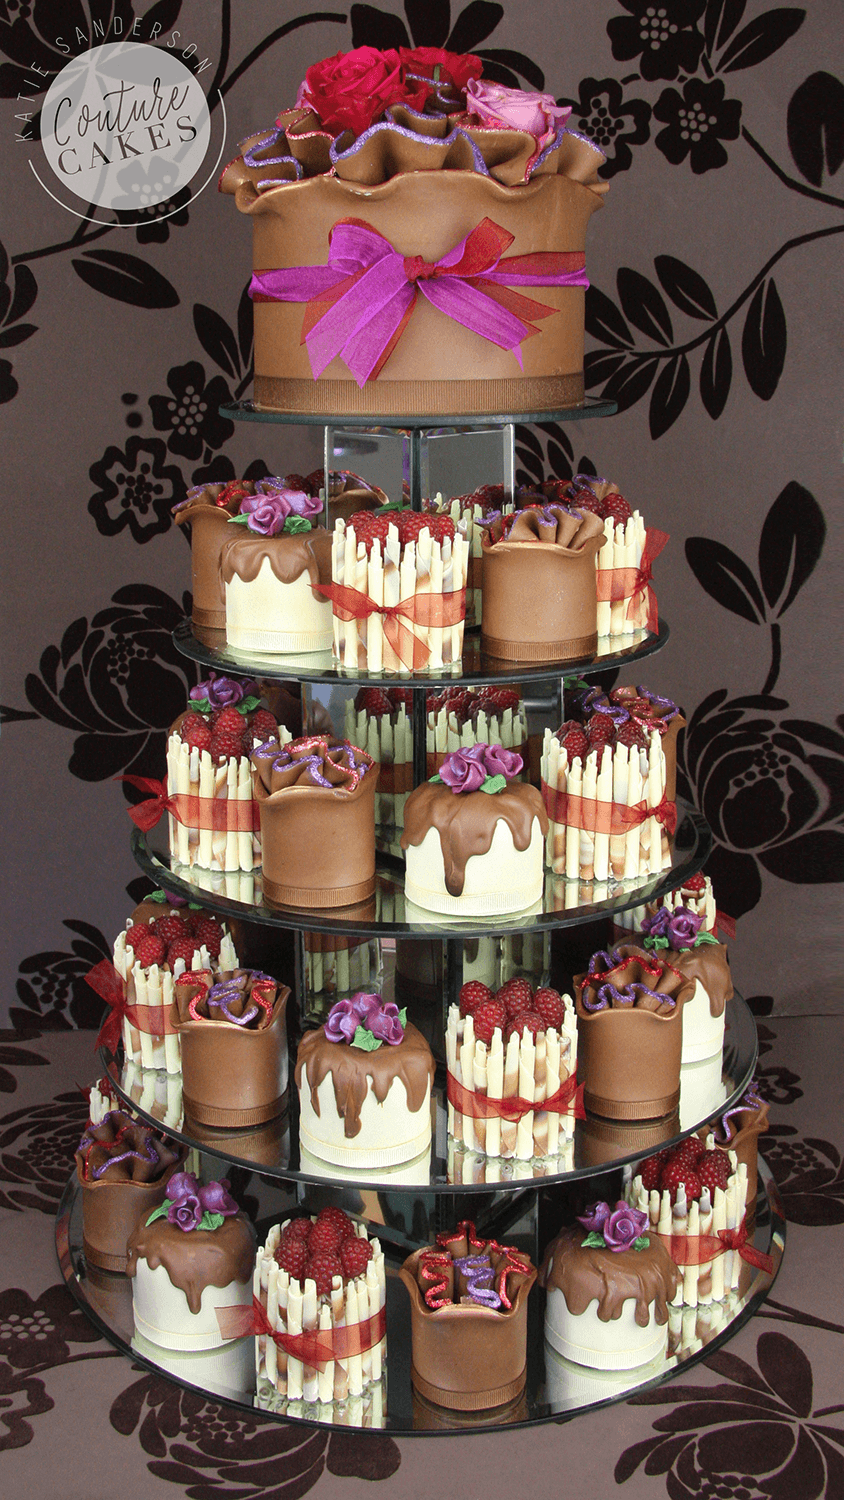 Serves 46 mini cakes & 20 portion top tier, Price as pictured £577